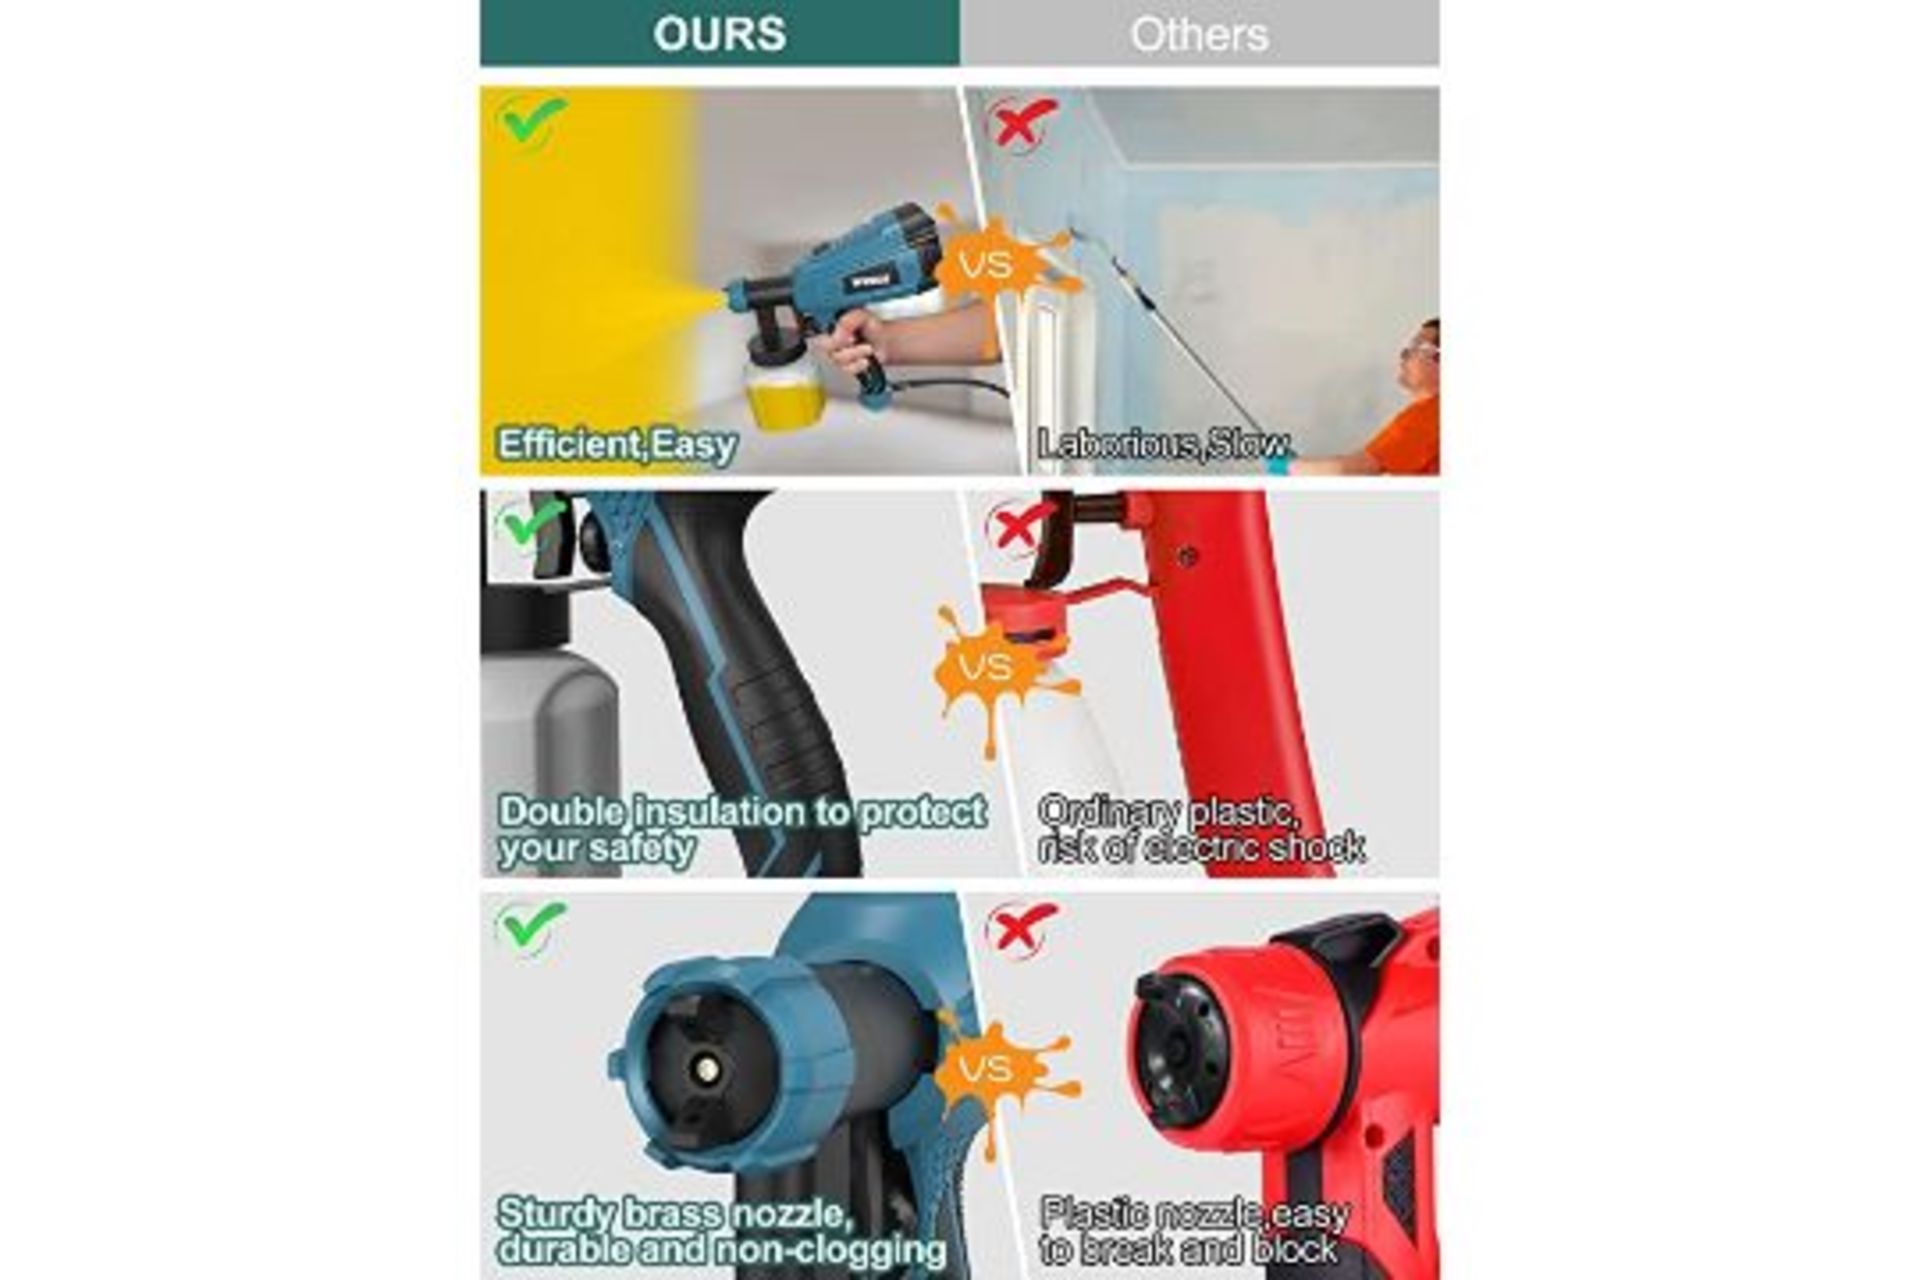 2 x NEW BOXED WESCO 500W Electric Paint Spray Gun with 3 Nozzles(1.5/1.8/2.0mm), 800ml/min Max Air - Image 2 of 3